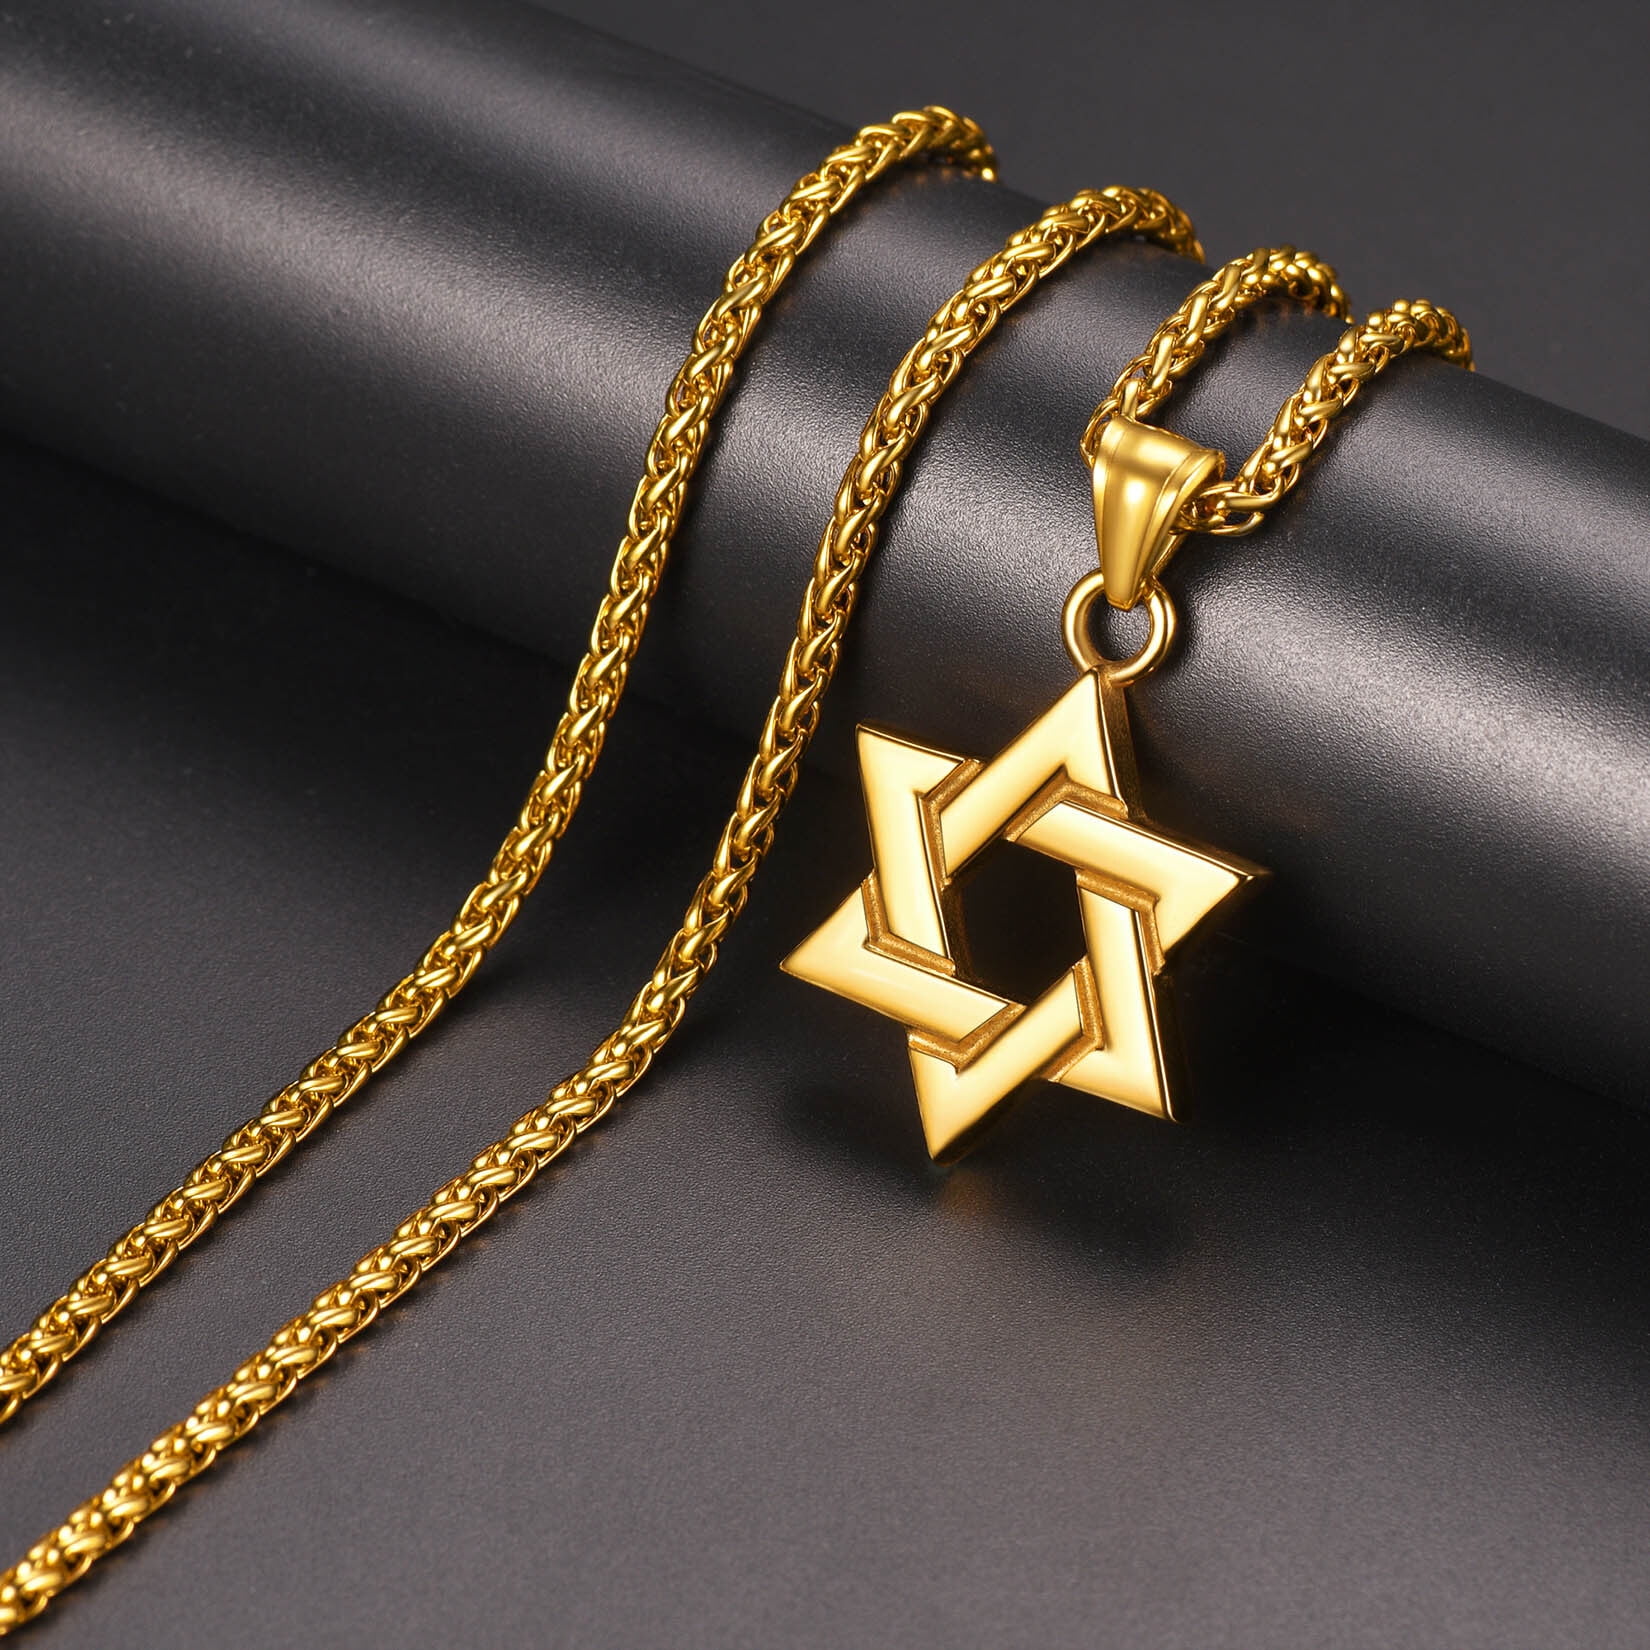 Buy Jewish Star Necklace Gold Magen David Necklace Men Jewish Star Necklace  and Birthstone Jewish Star Necklace for Men Online in India - Etsy